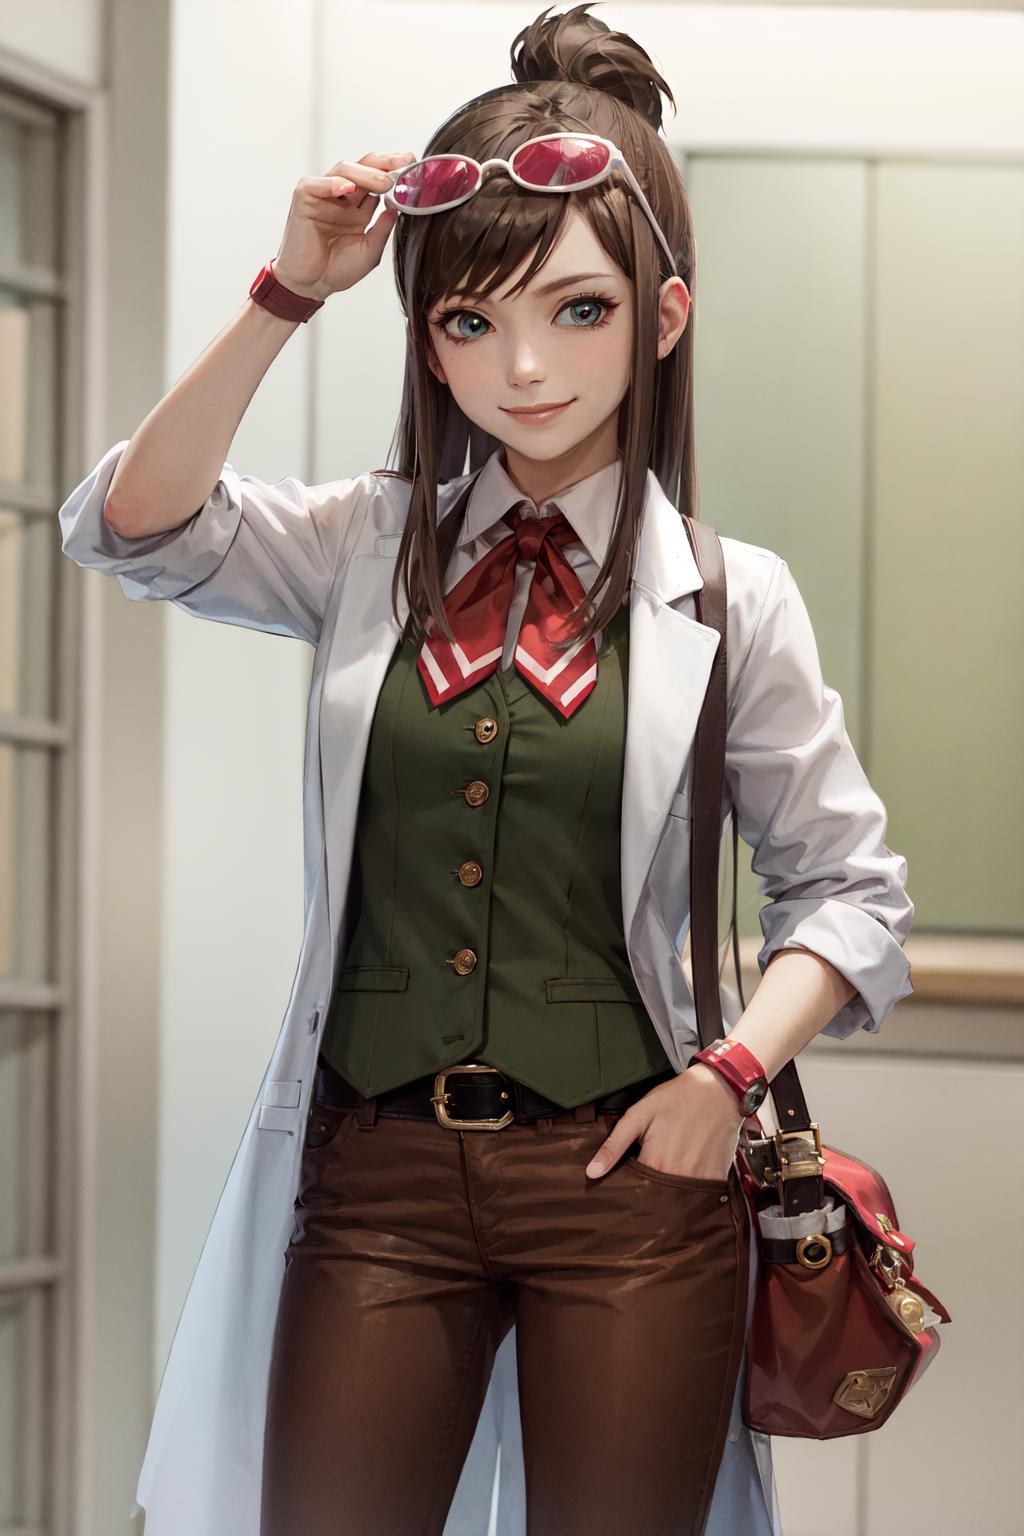 Ema Skye | Ace Attorney image by justTNP